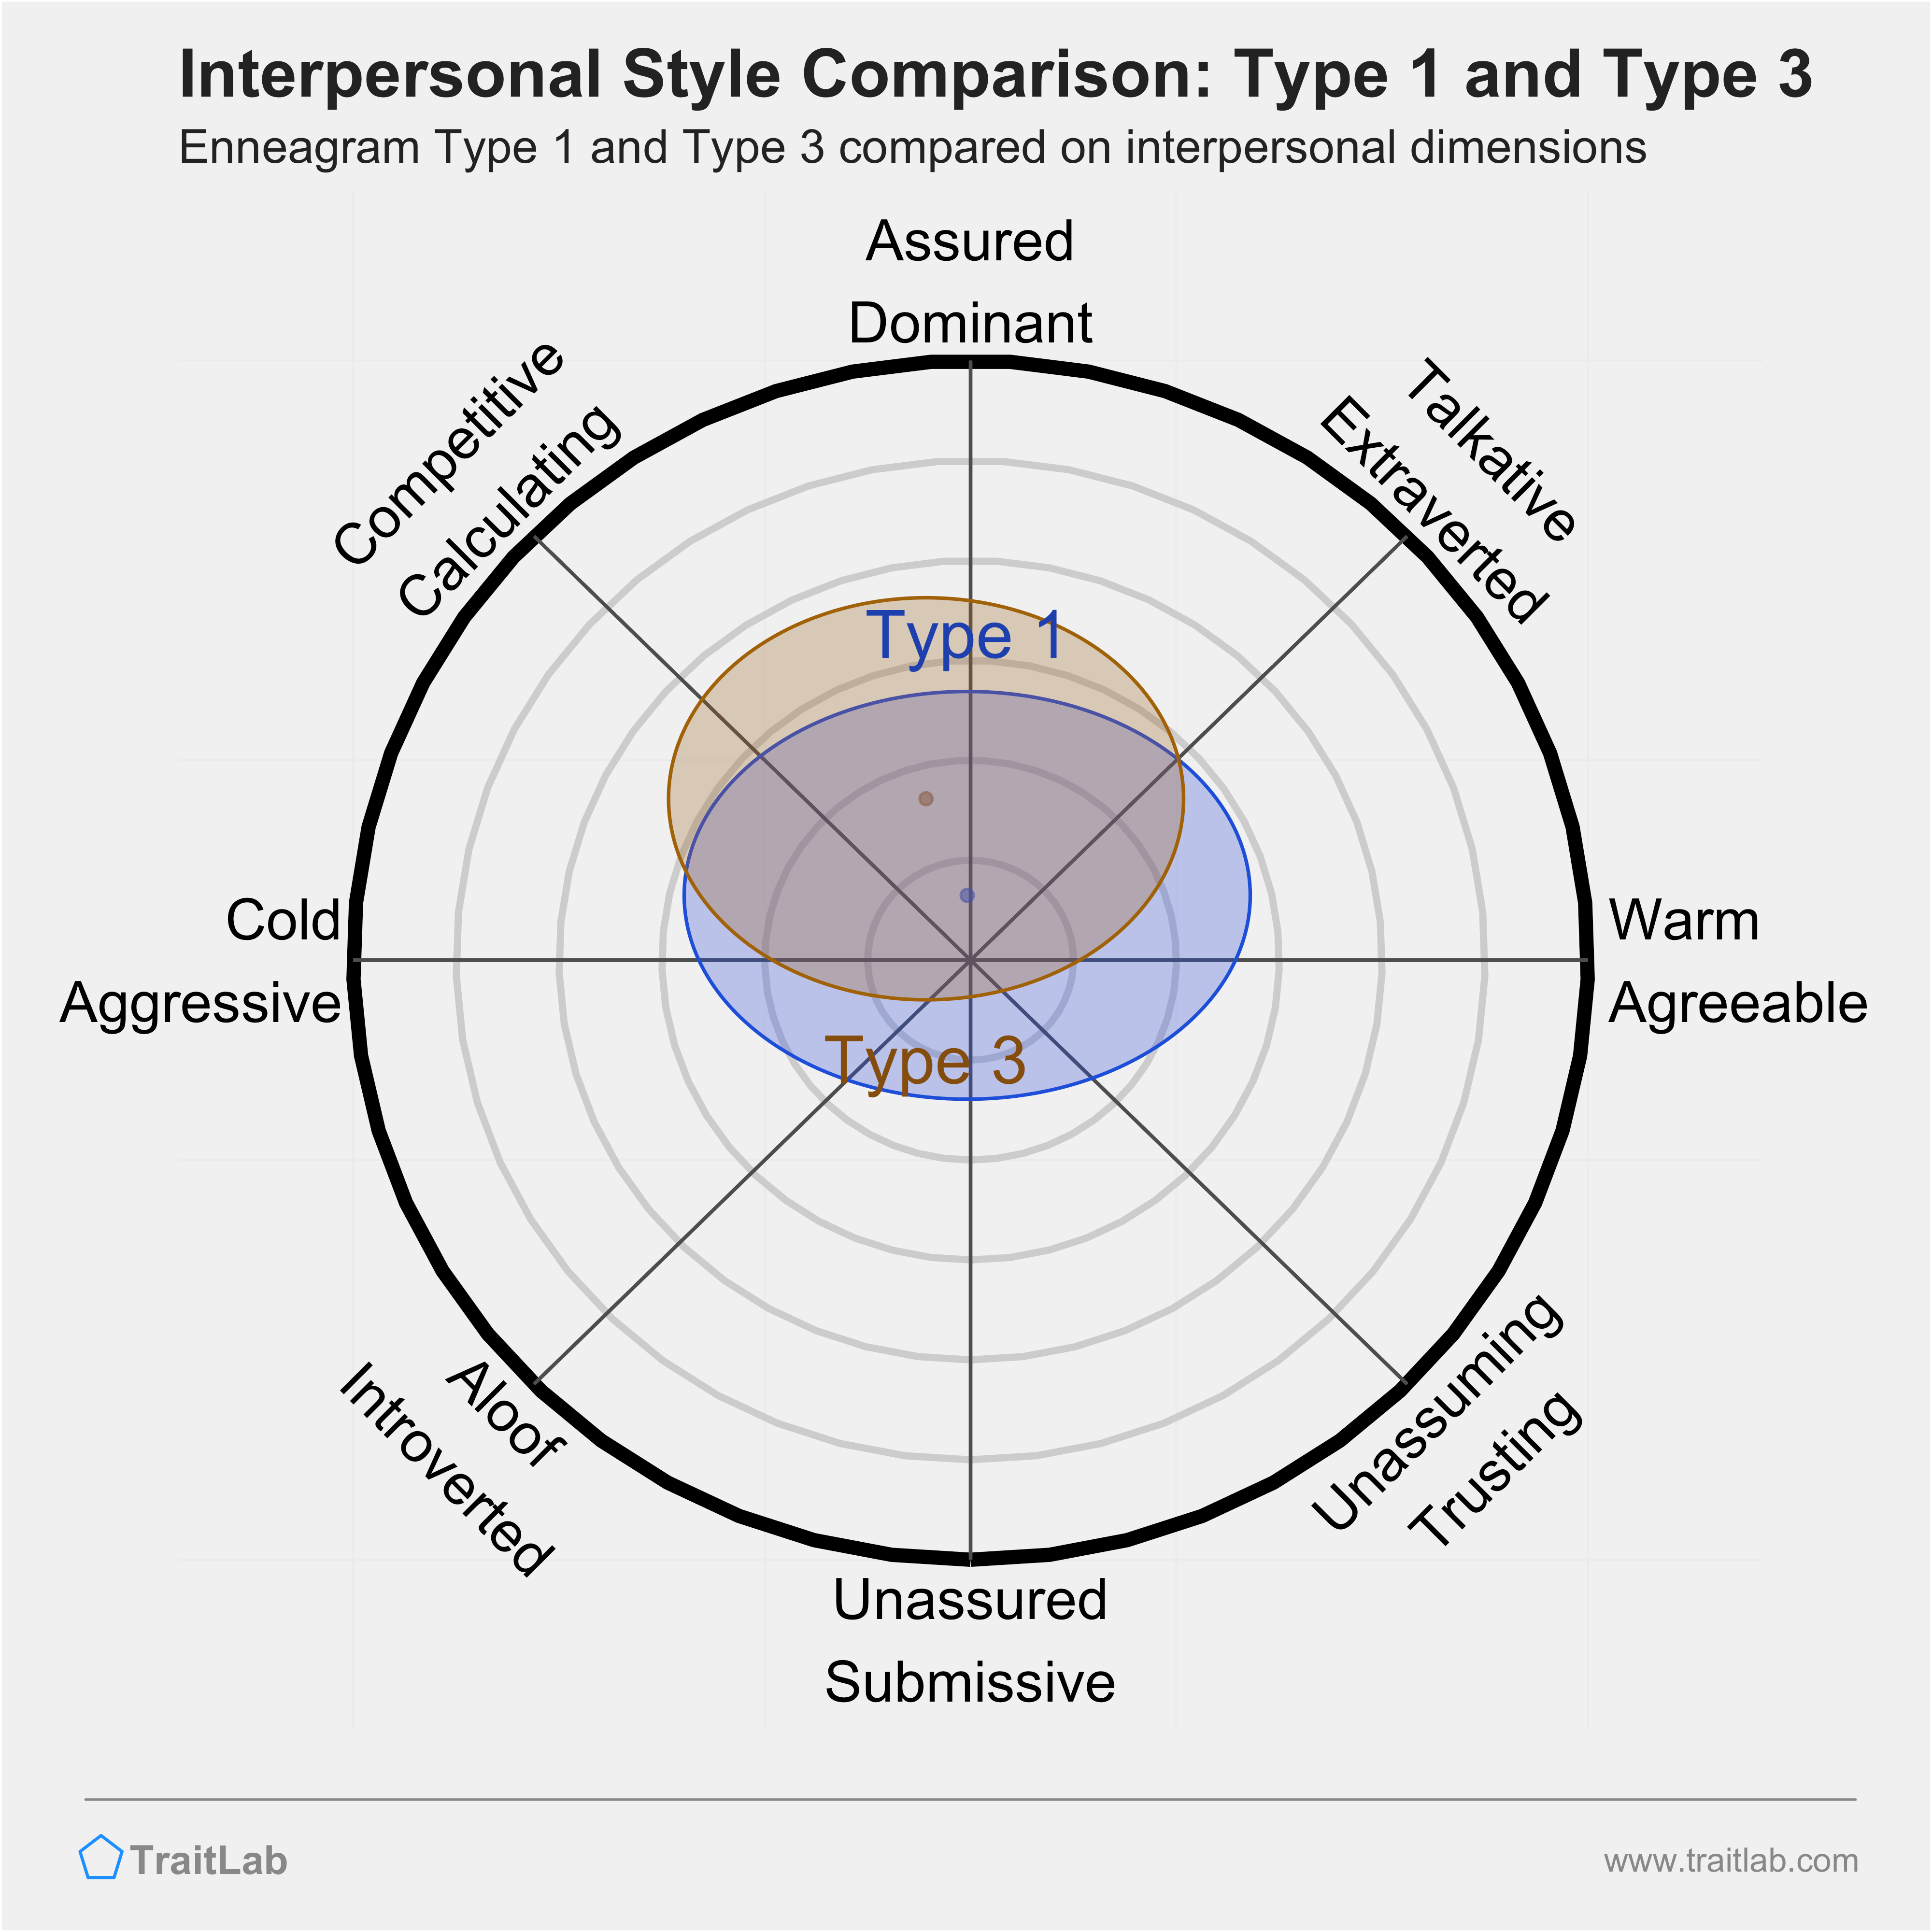 Enneagram Type 1 and Type 3 comparison across interpersonal dimensions